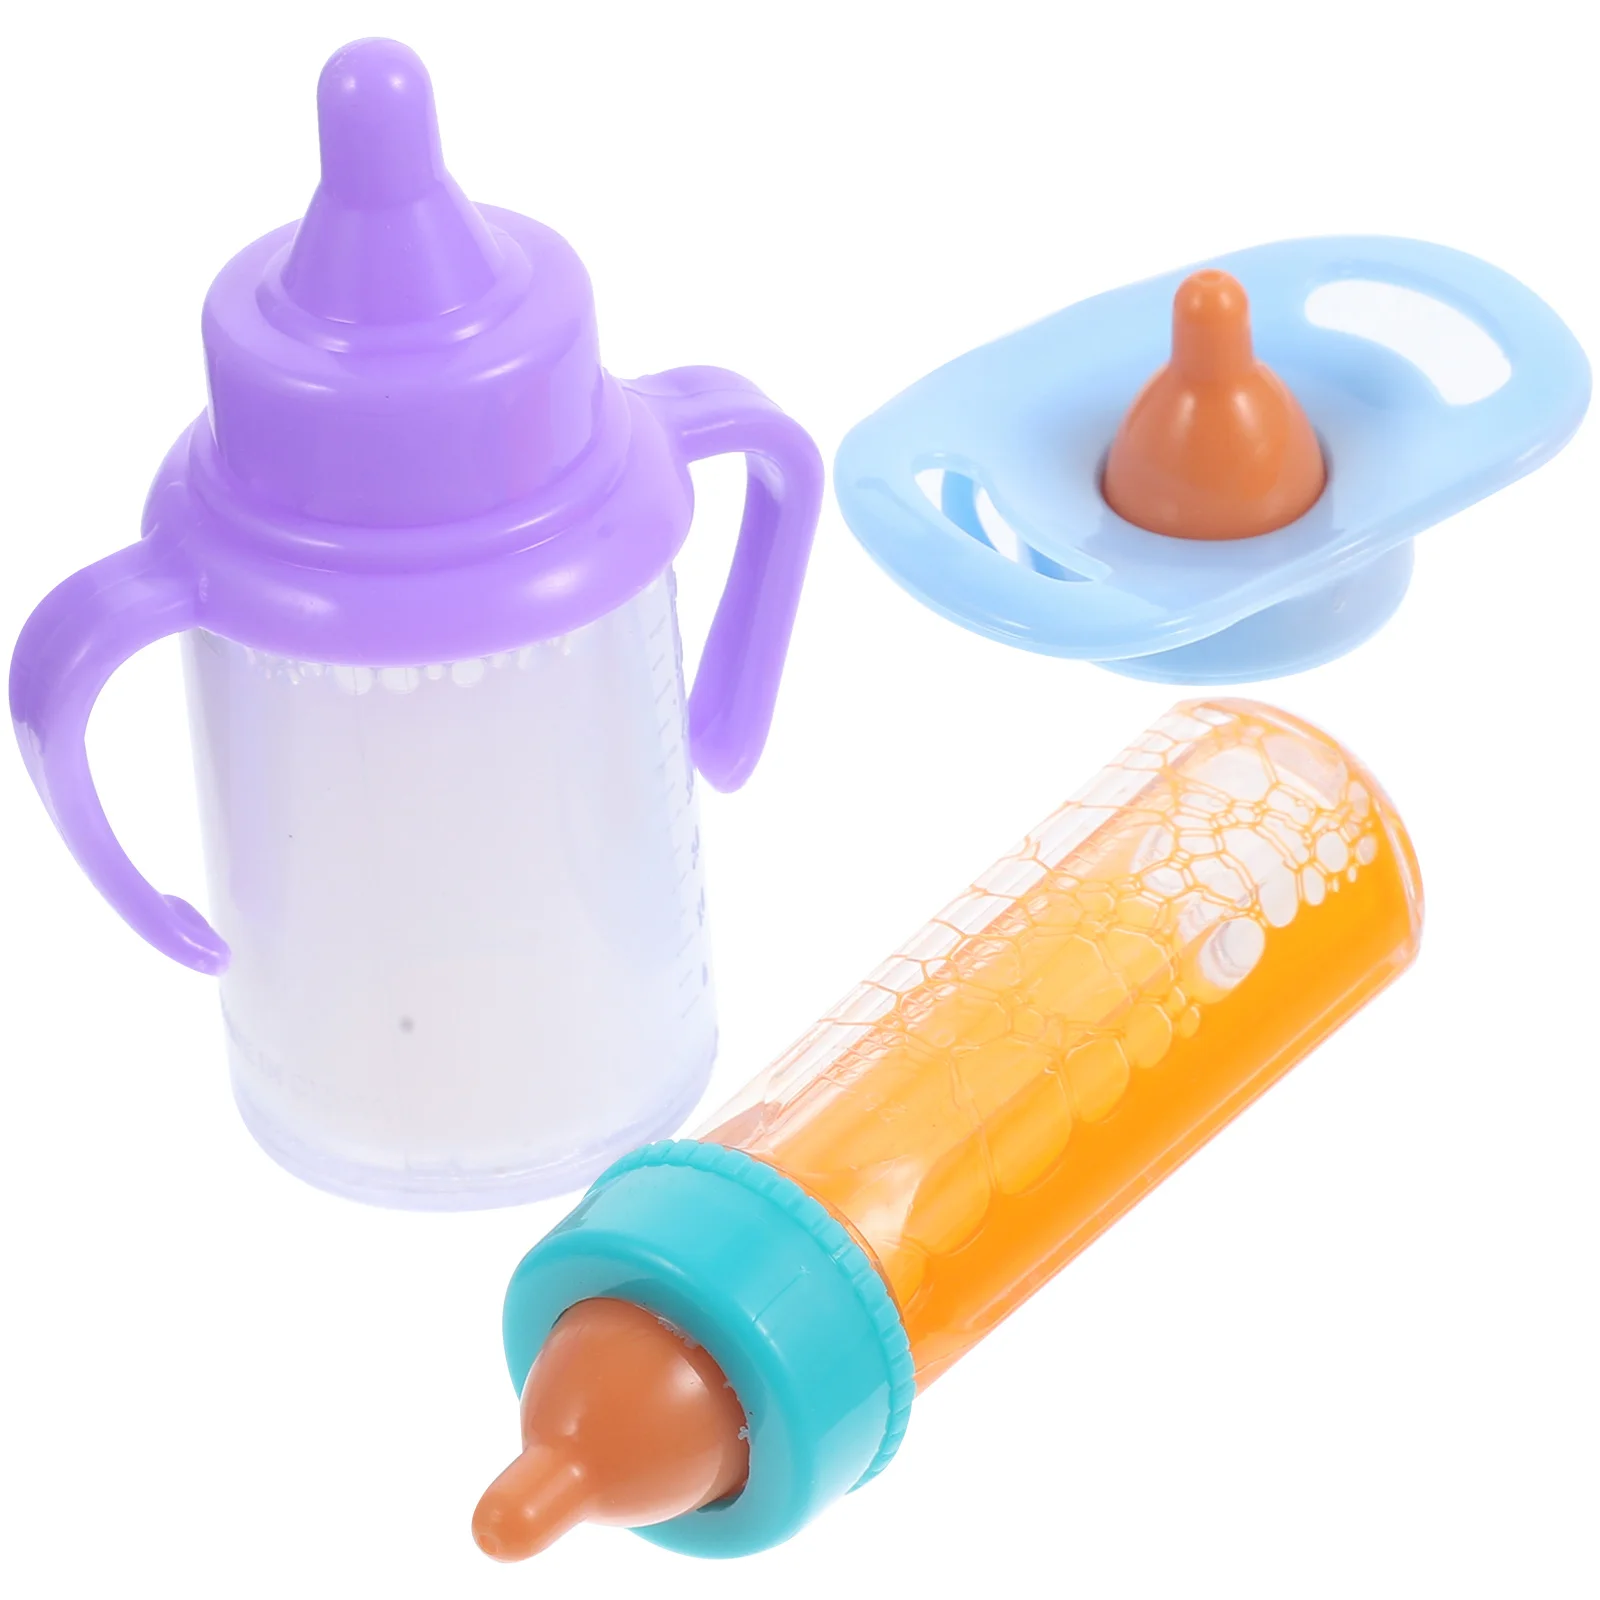 

Toys Accessories Bottle Juice Play House (Small Blue Combination Pj-4/5/6) Feed Bottles Child